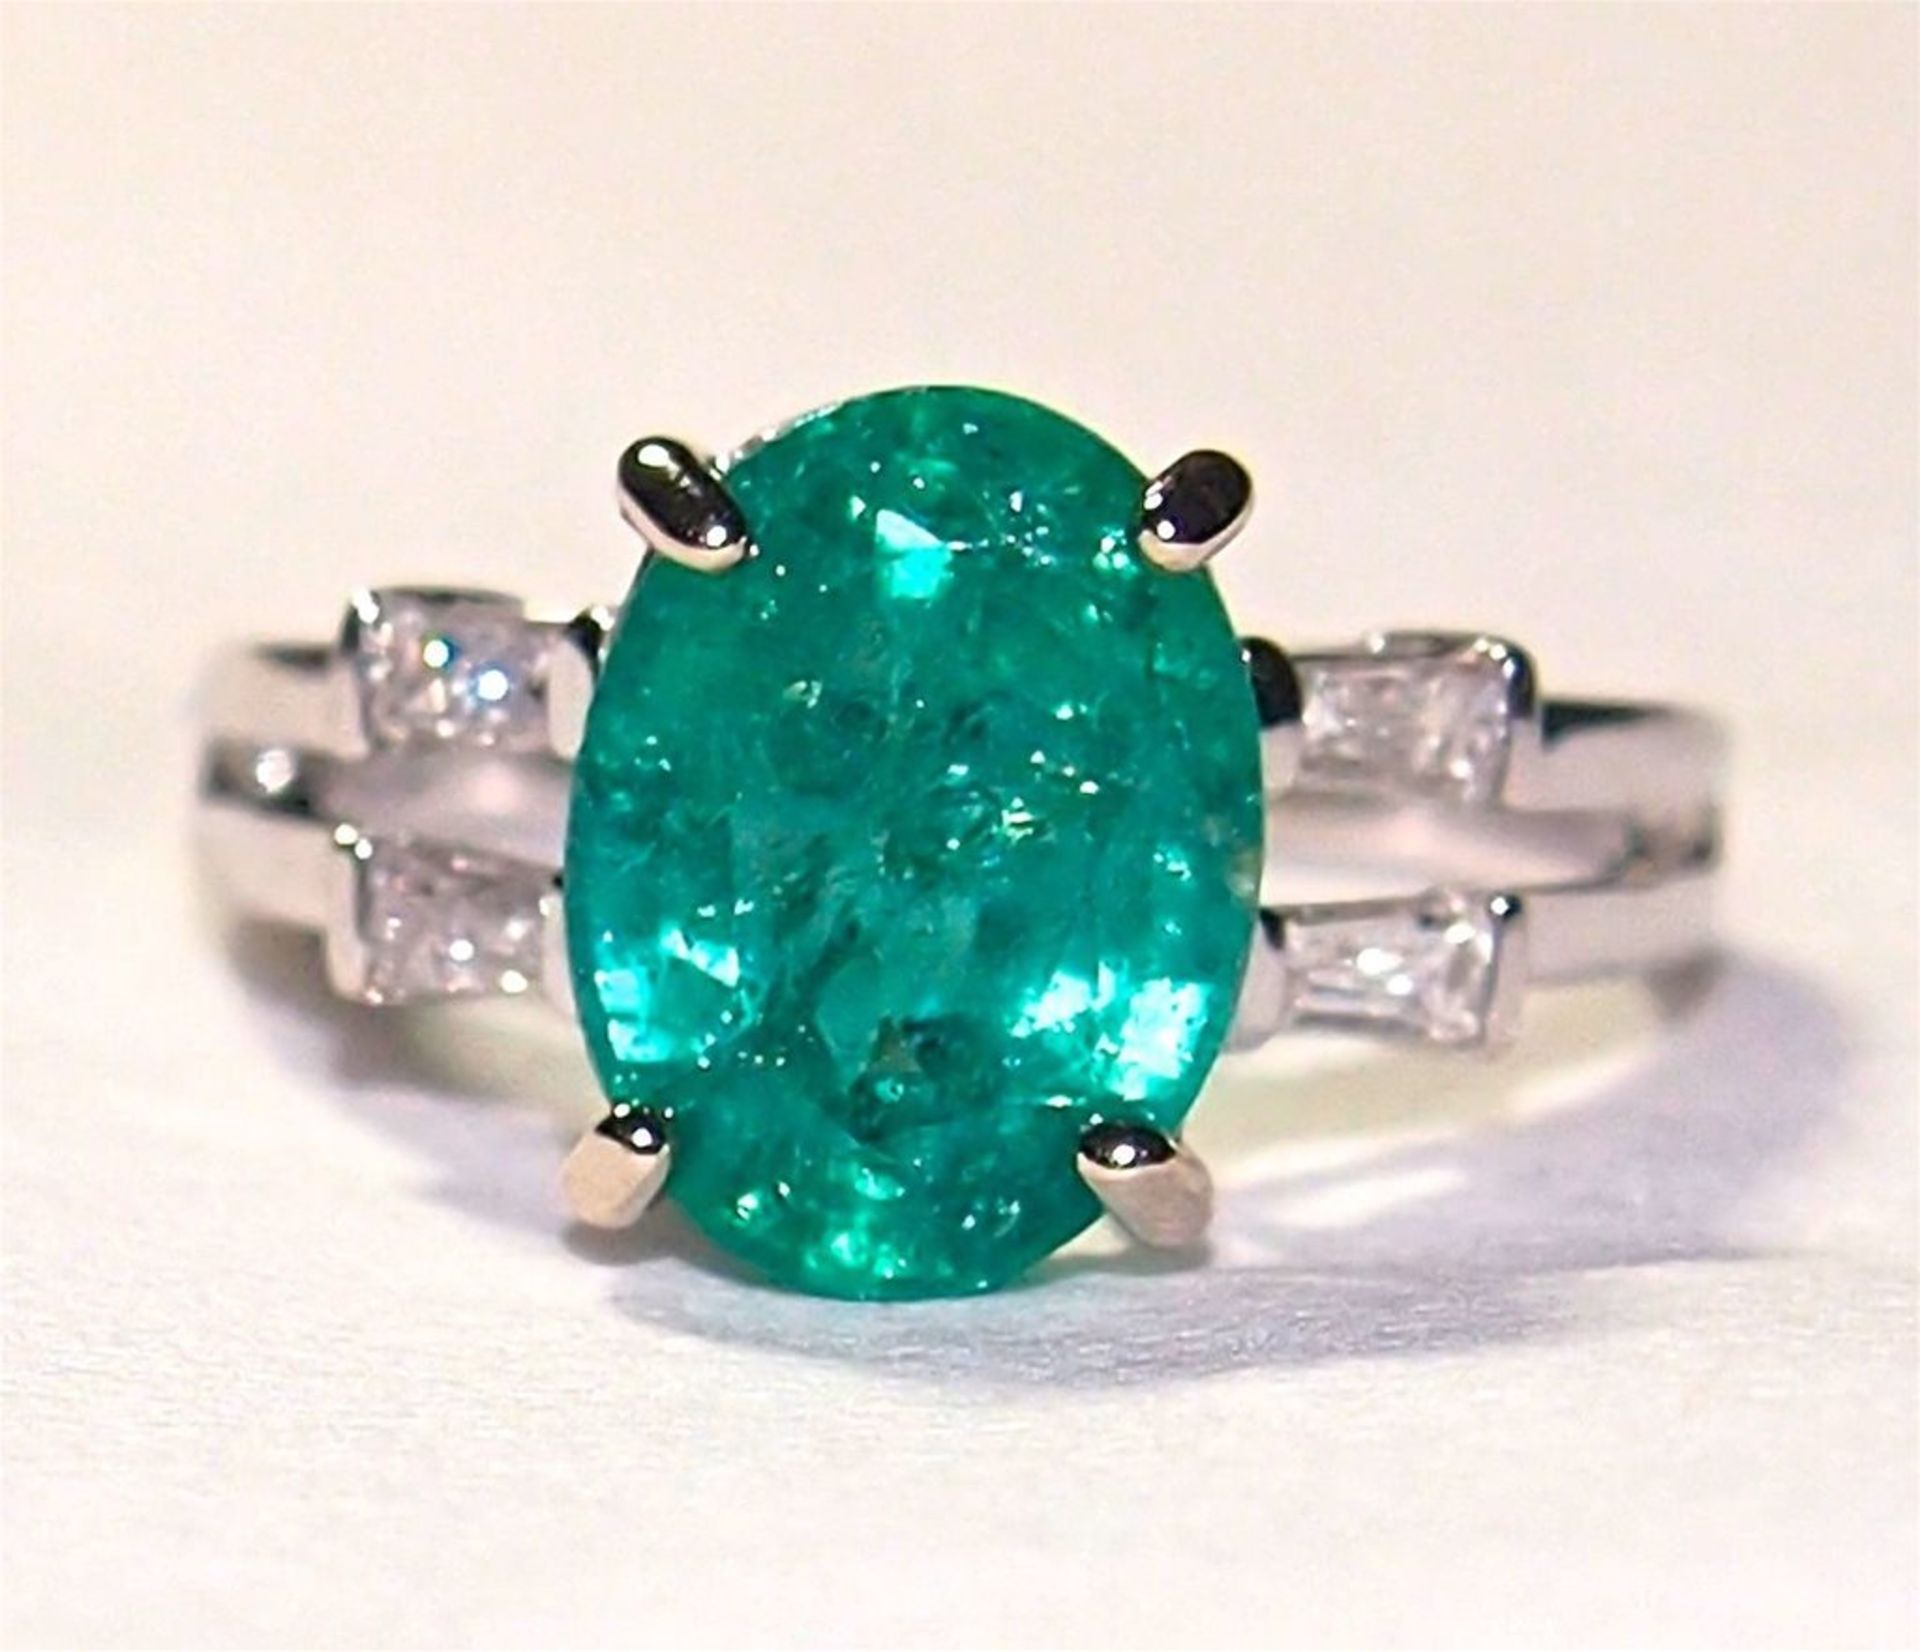 Certified Natural Emerald & Diamonds Ring - Image 2 of 4